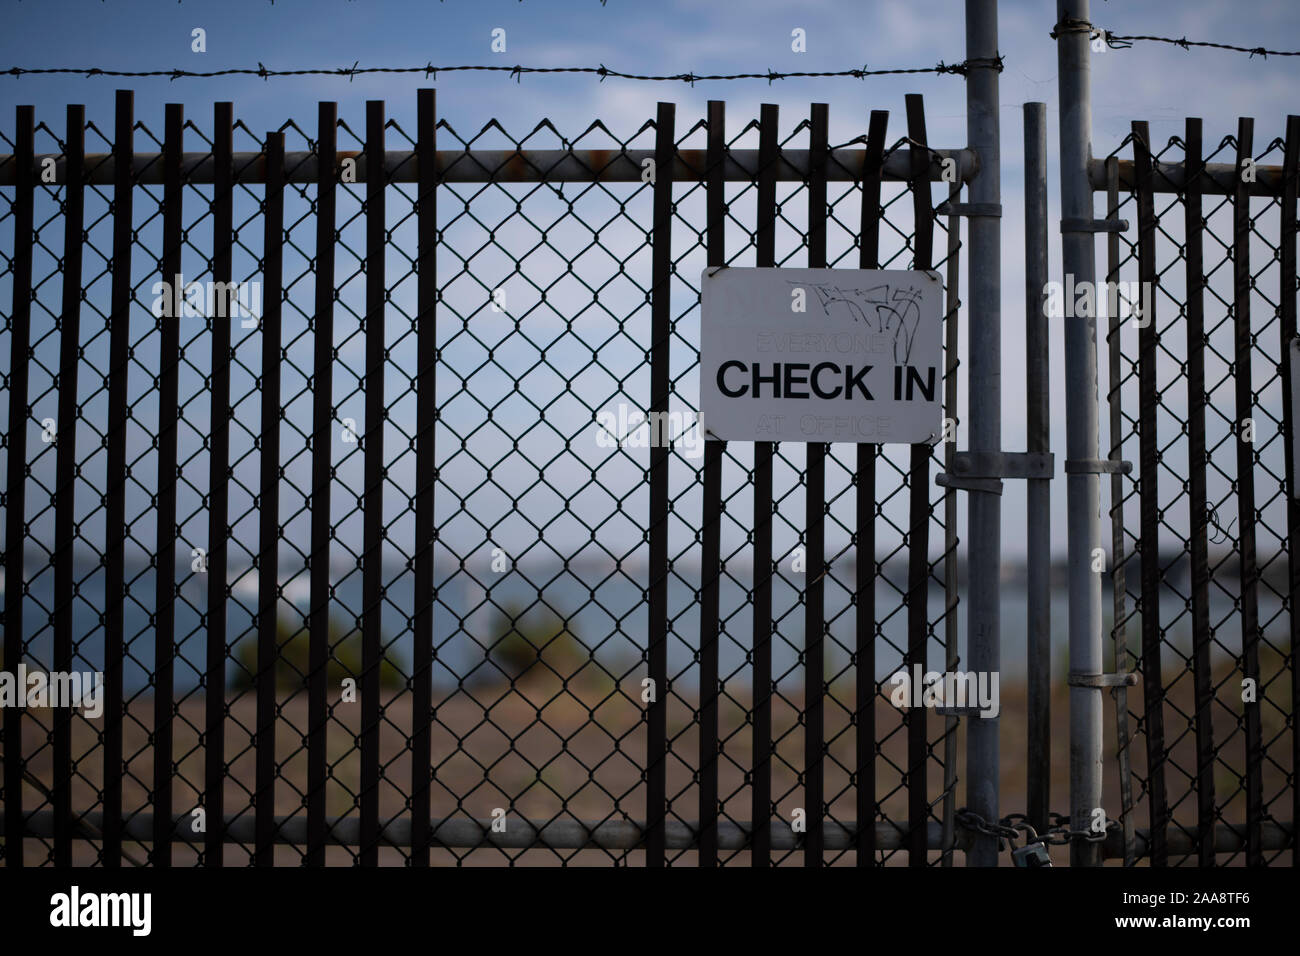 Barbed wire fence with Check In sign Stock Photo